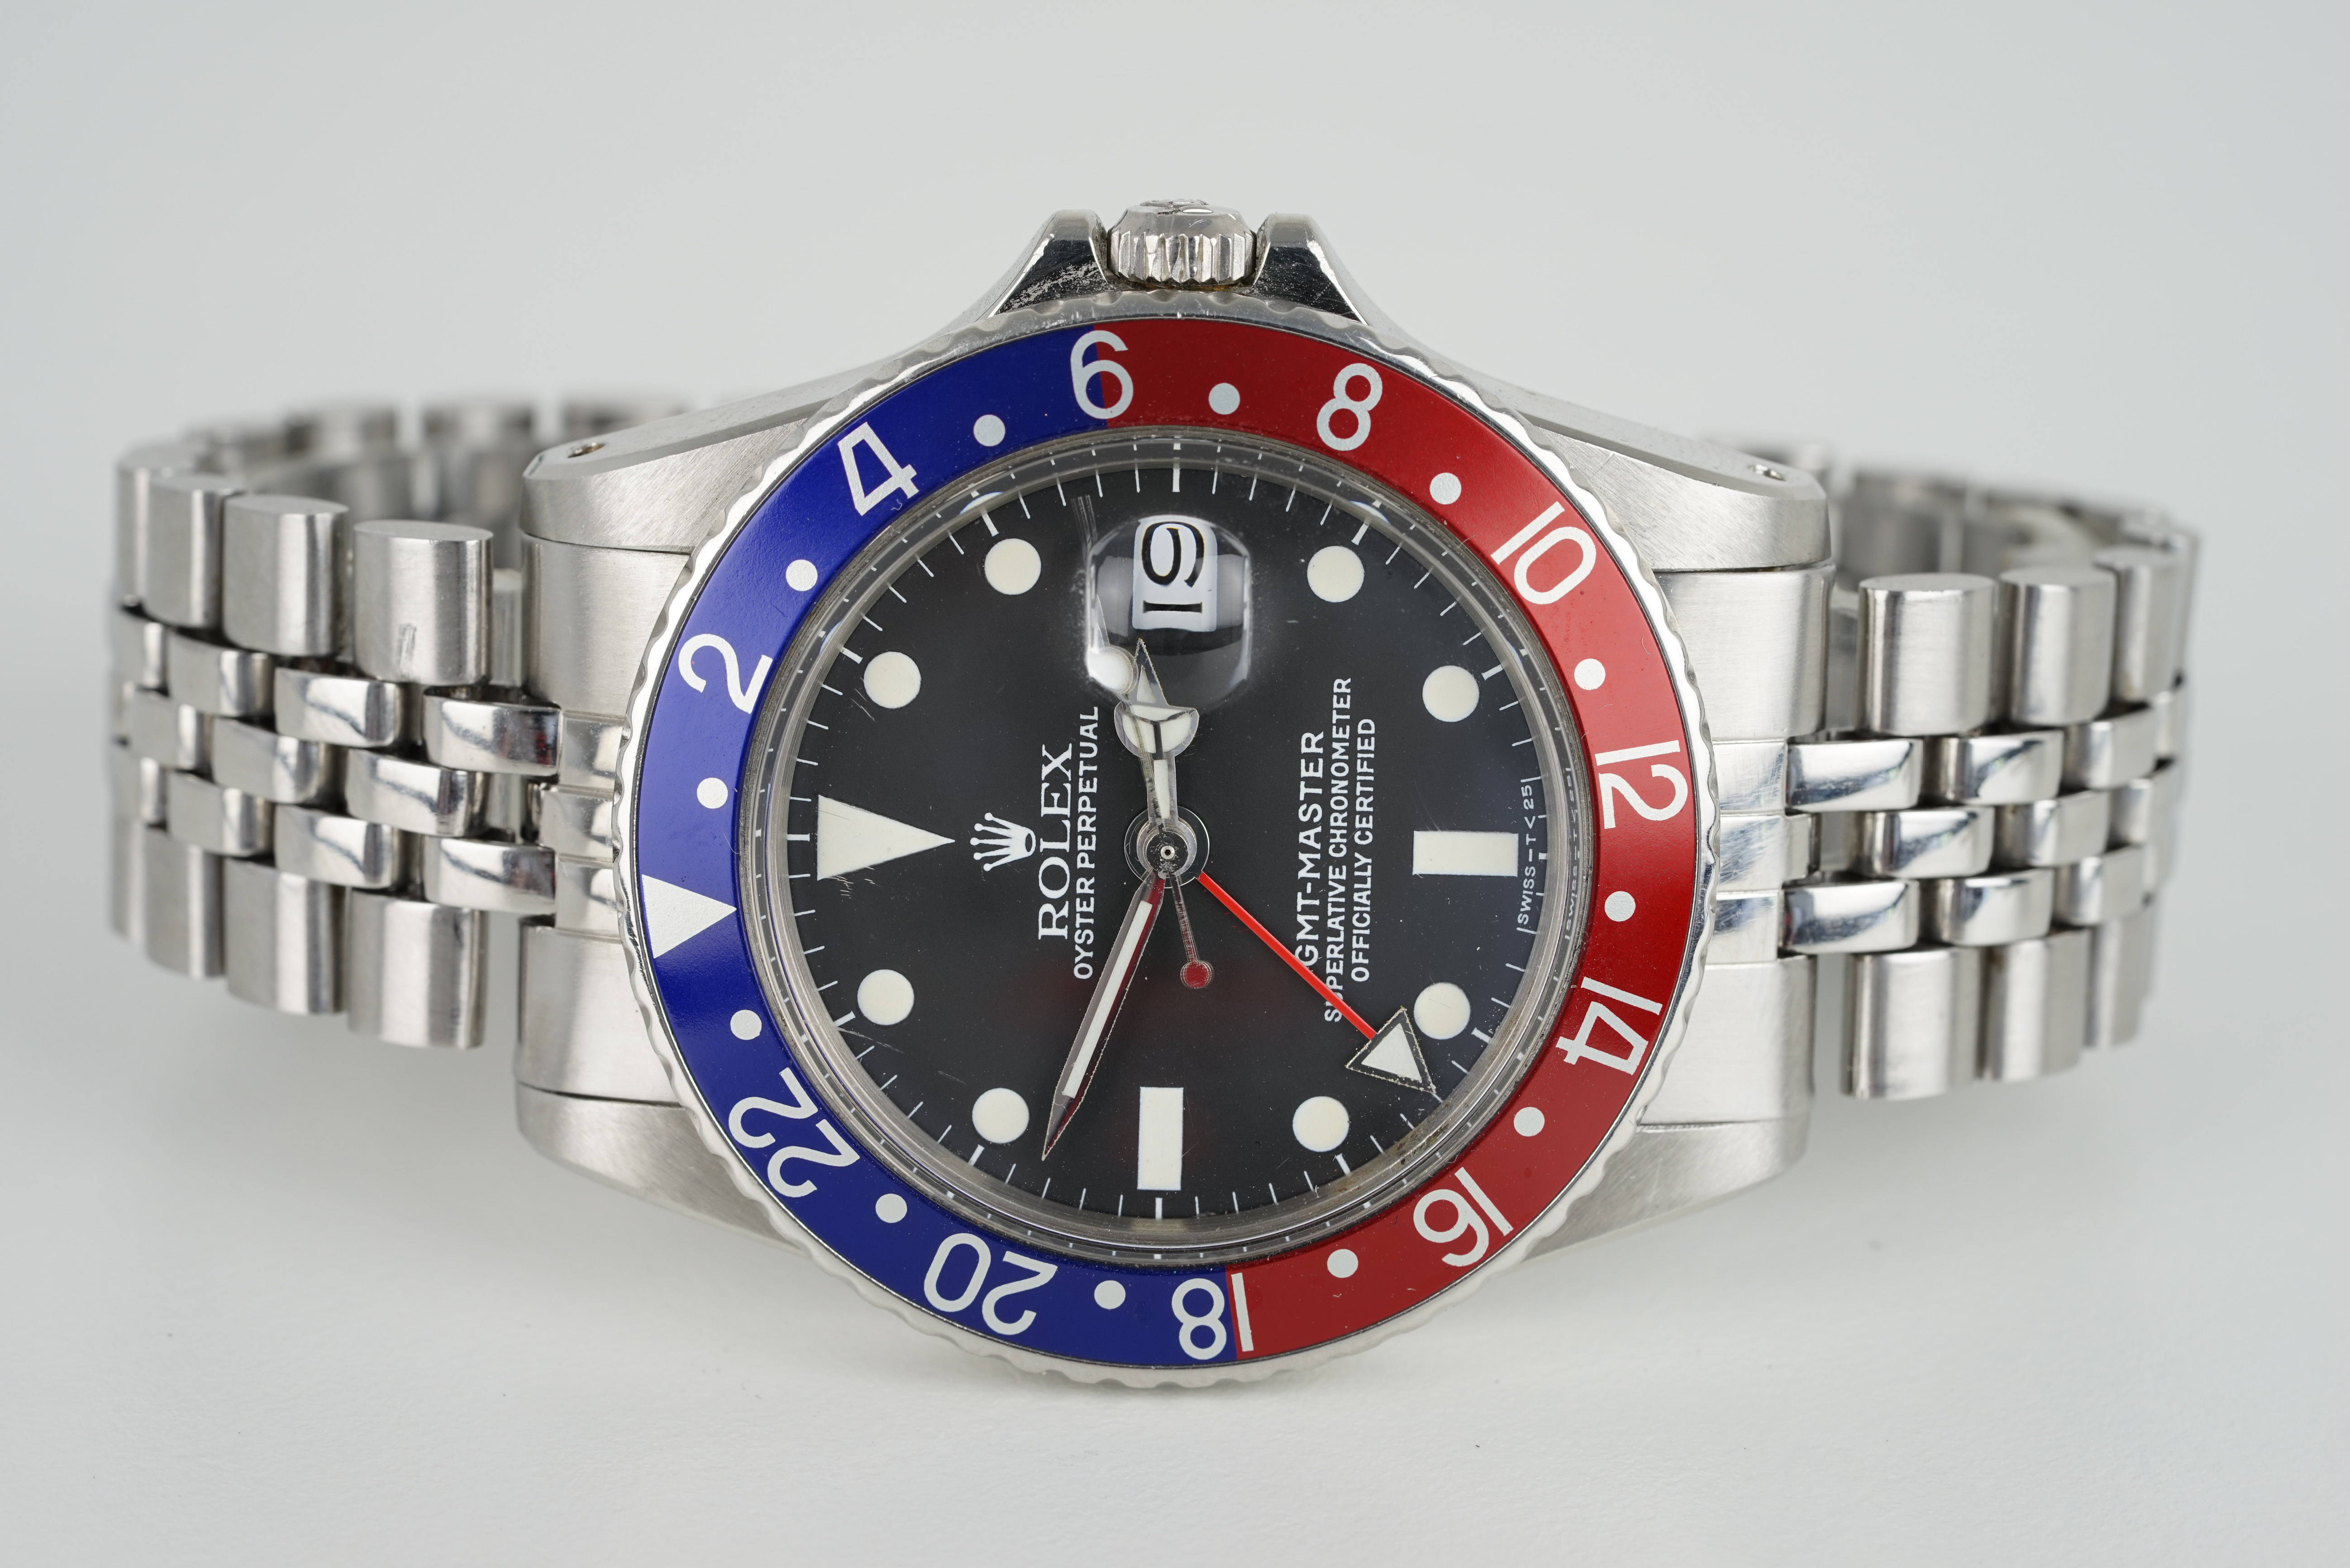 GENTLEMENS ROLEX OYSTER PERPETUAL GMT MASTER WRISTWATCH FULL SET W/ BOX & GUARANTEE REF. 1675 - Image 2 of 7